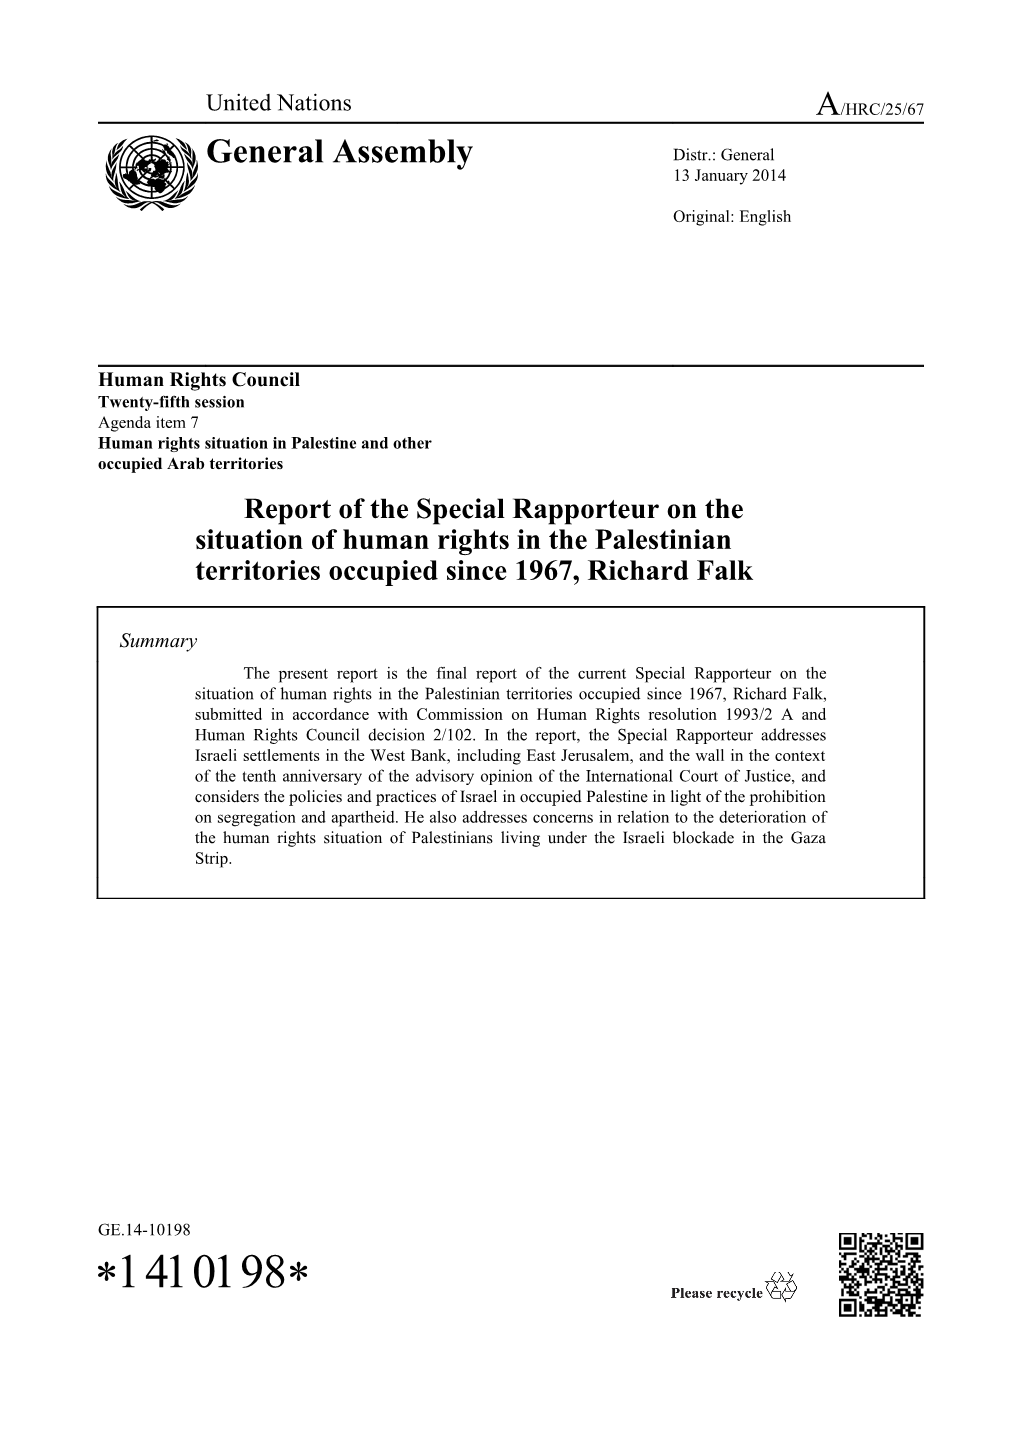 Report of the Special Rapporteur on the Situation of Human Rights in the Palestinian Territories